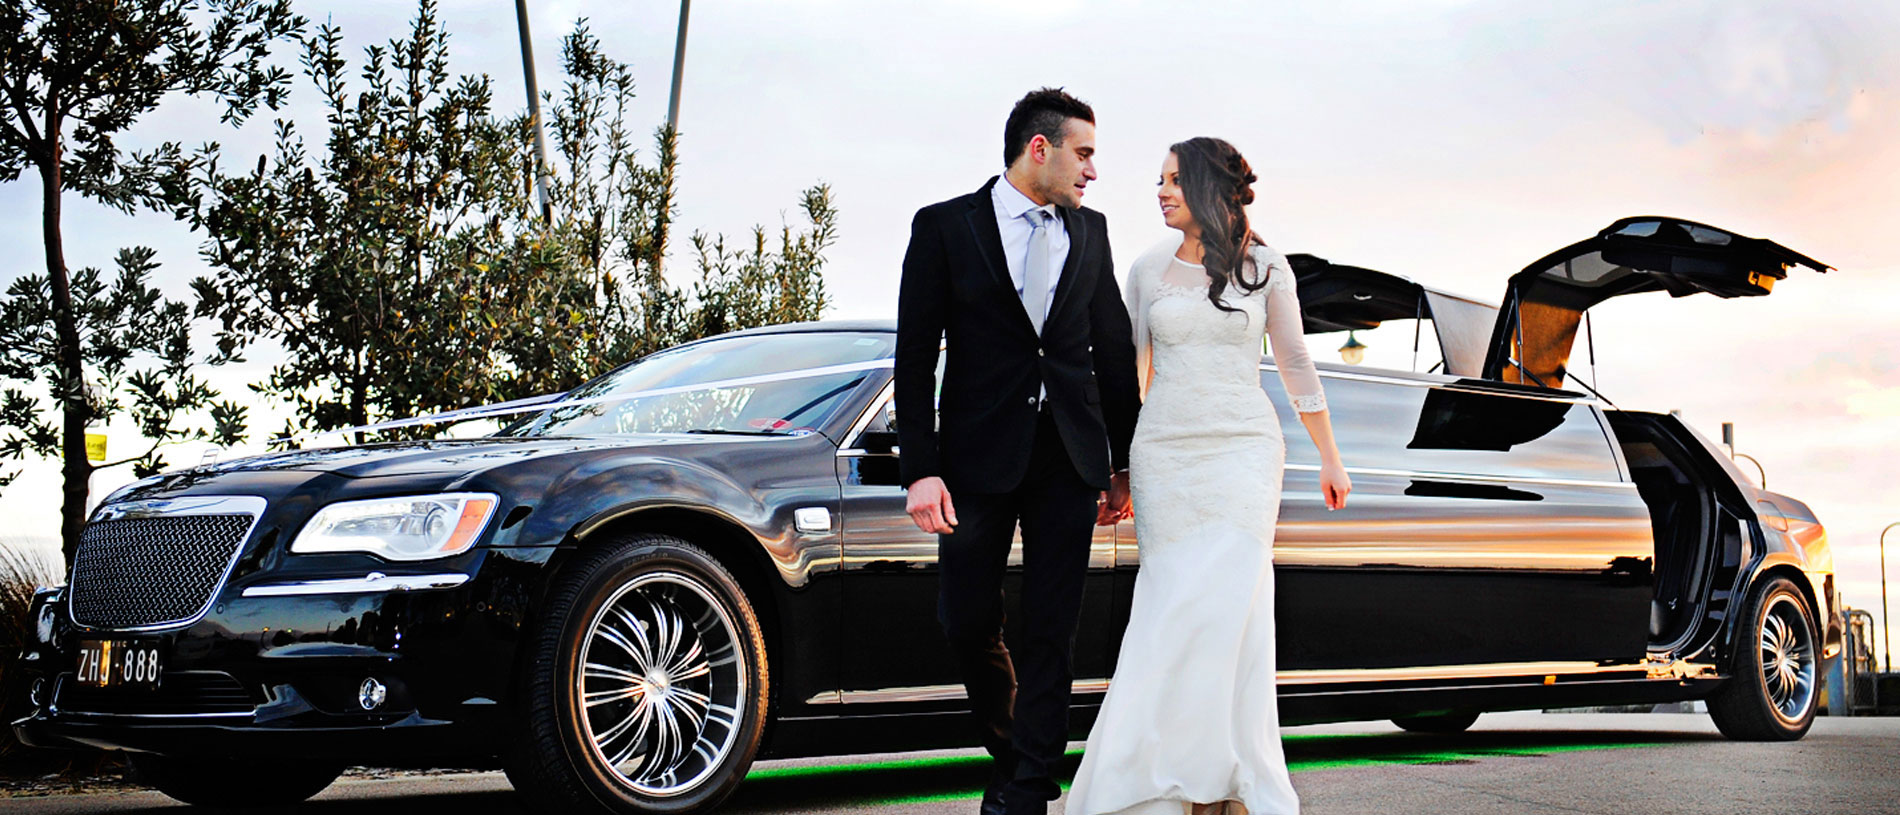 Wedding Limo Services in California